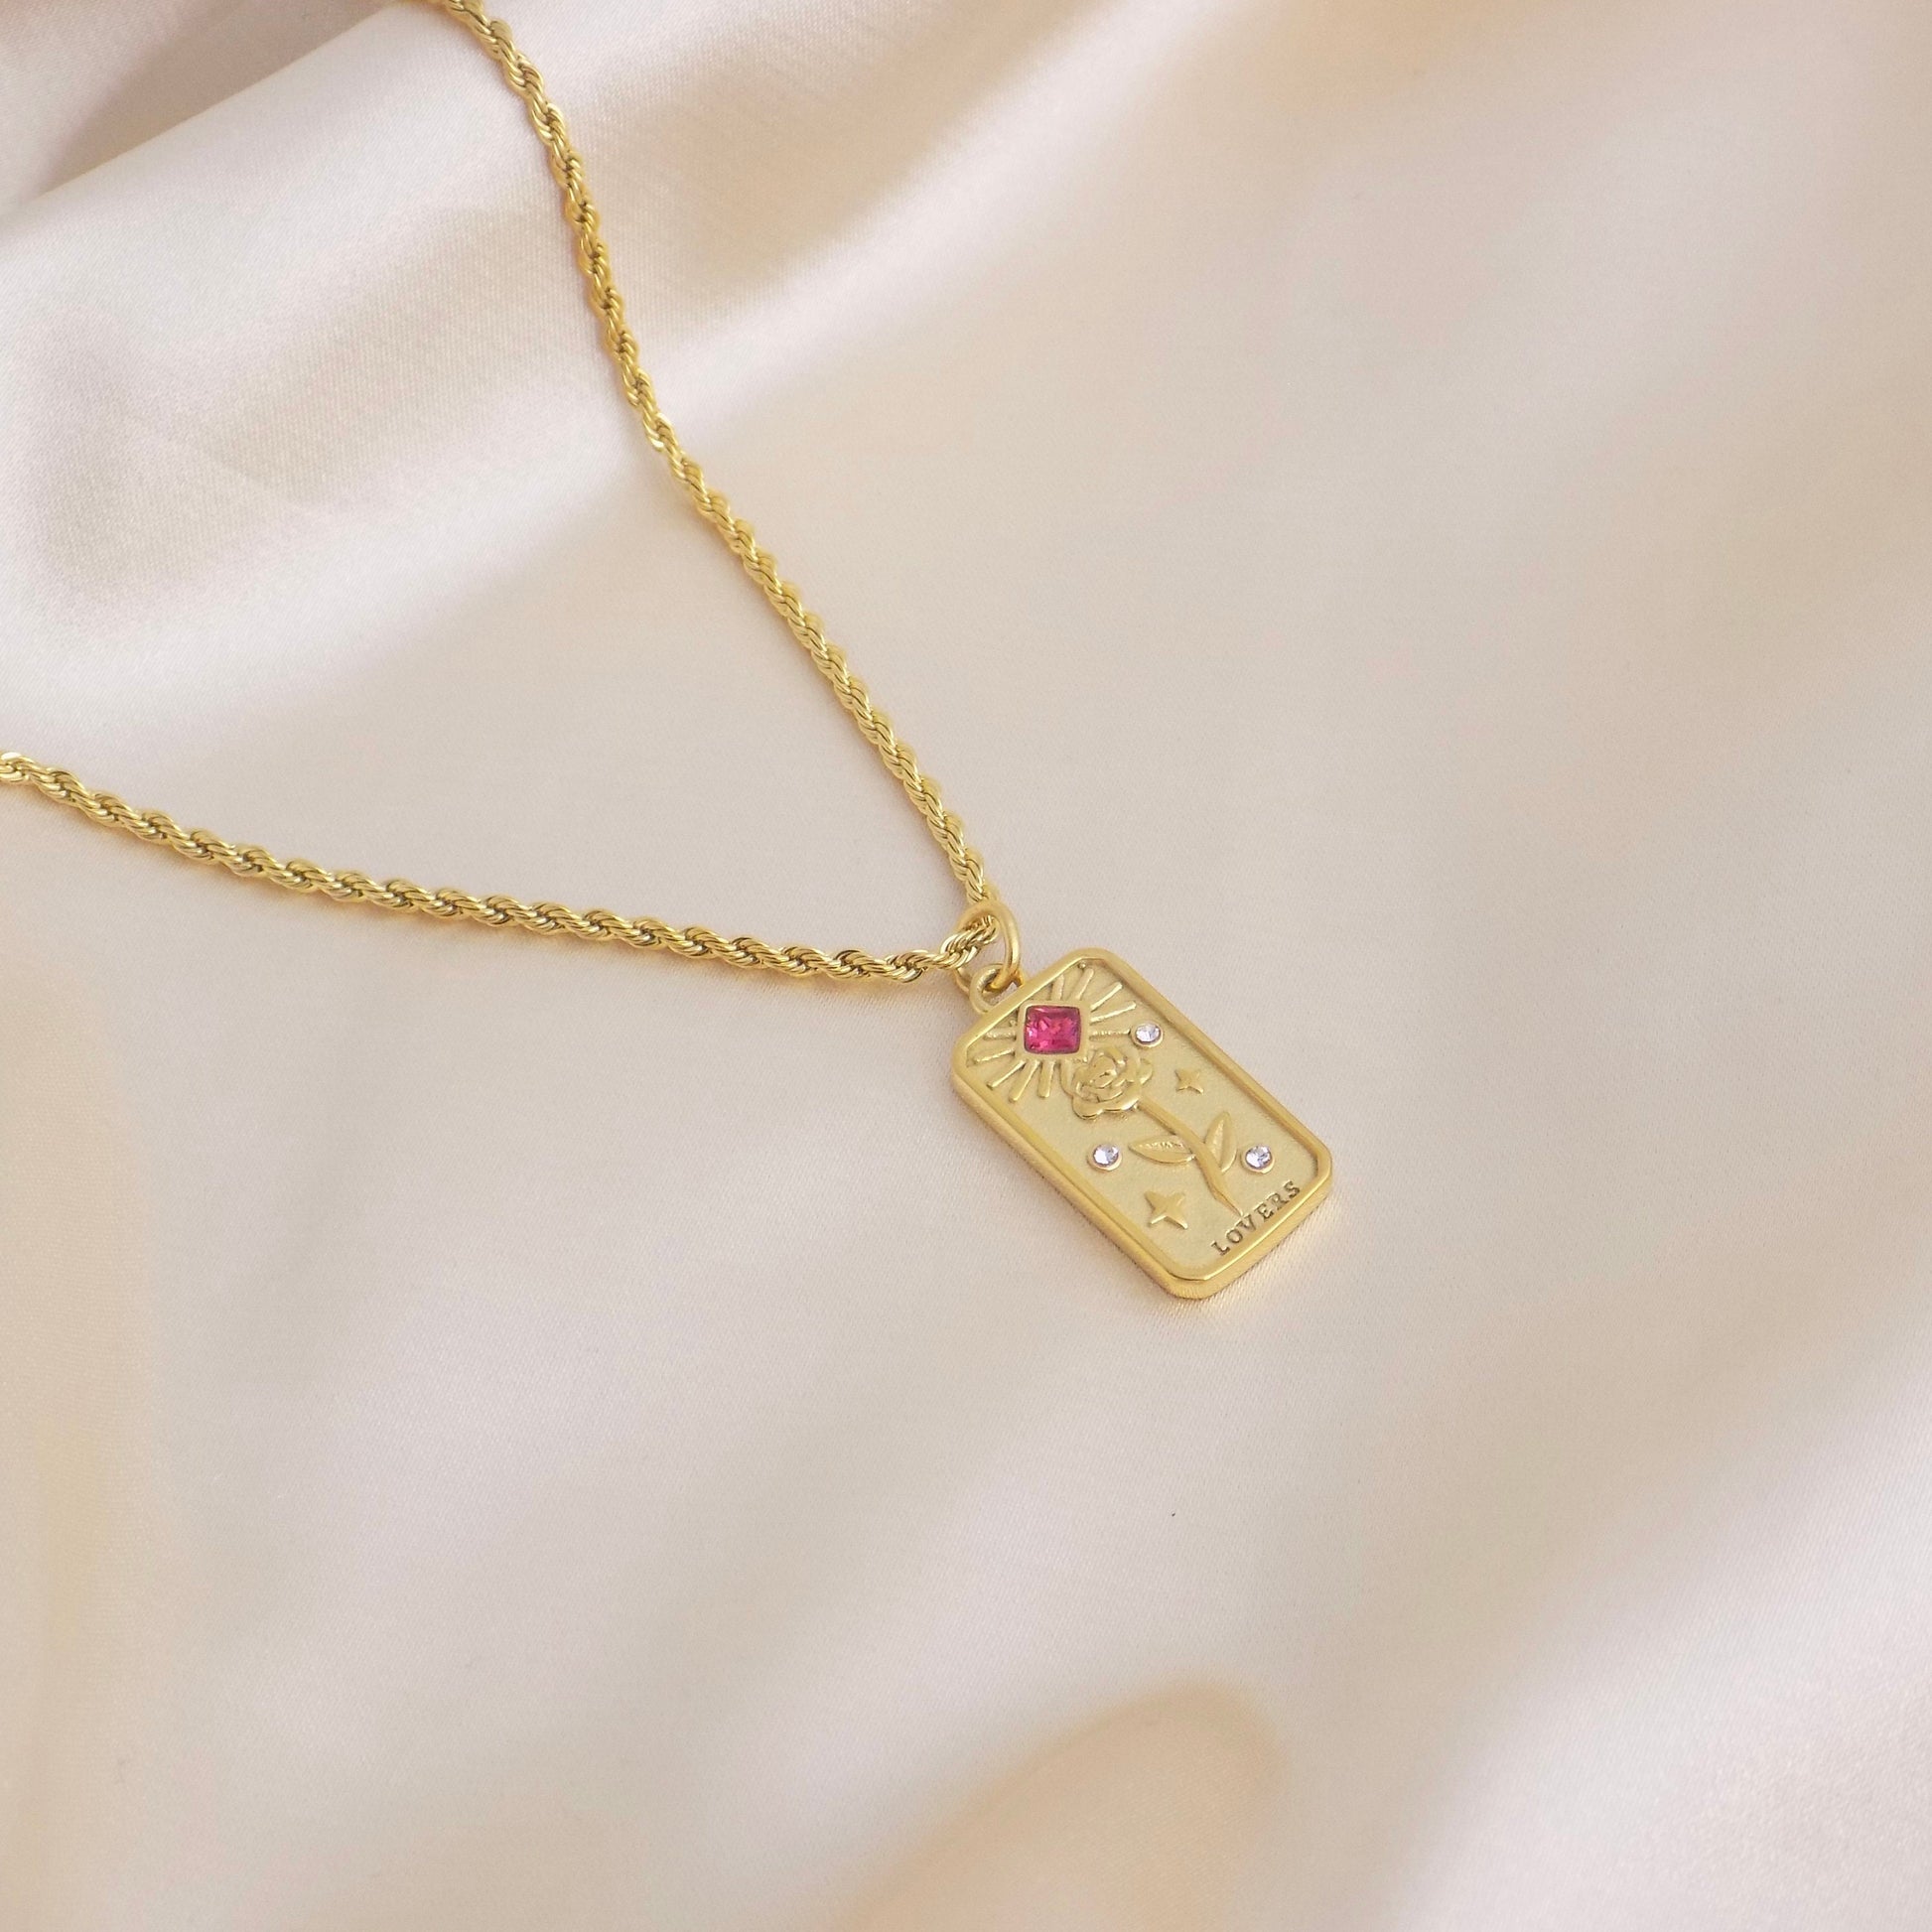 Tarot Card Necklace, Gold Tag Necklace, 18K Gold Stainless Steel Rope Chain, Ruby Flower Charm, Trendy Layering, M6-105